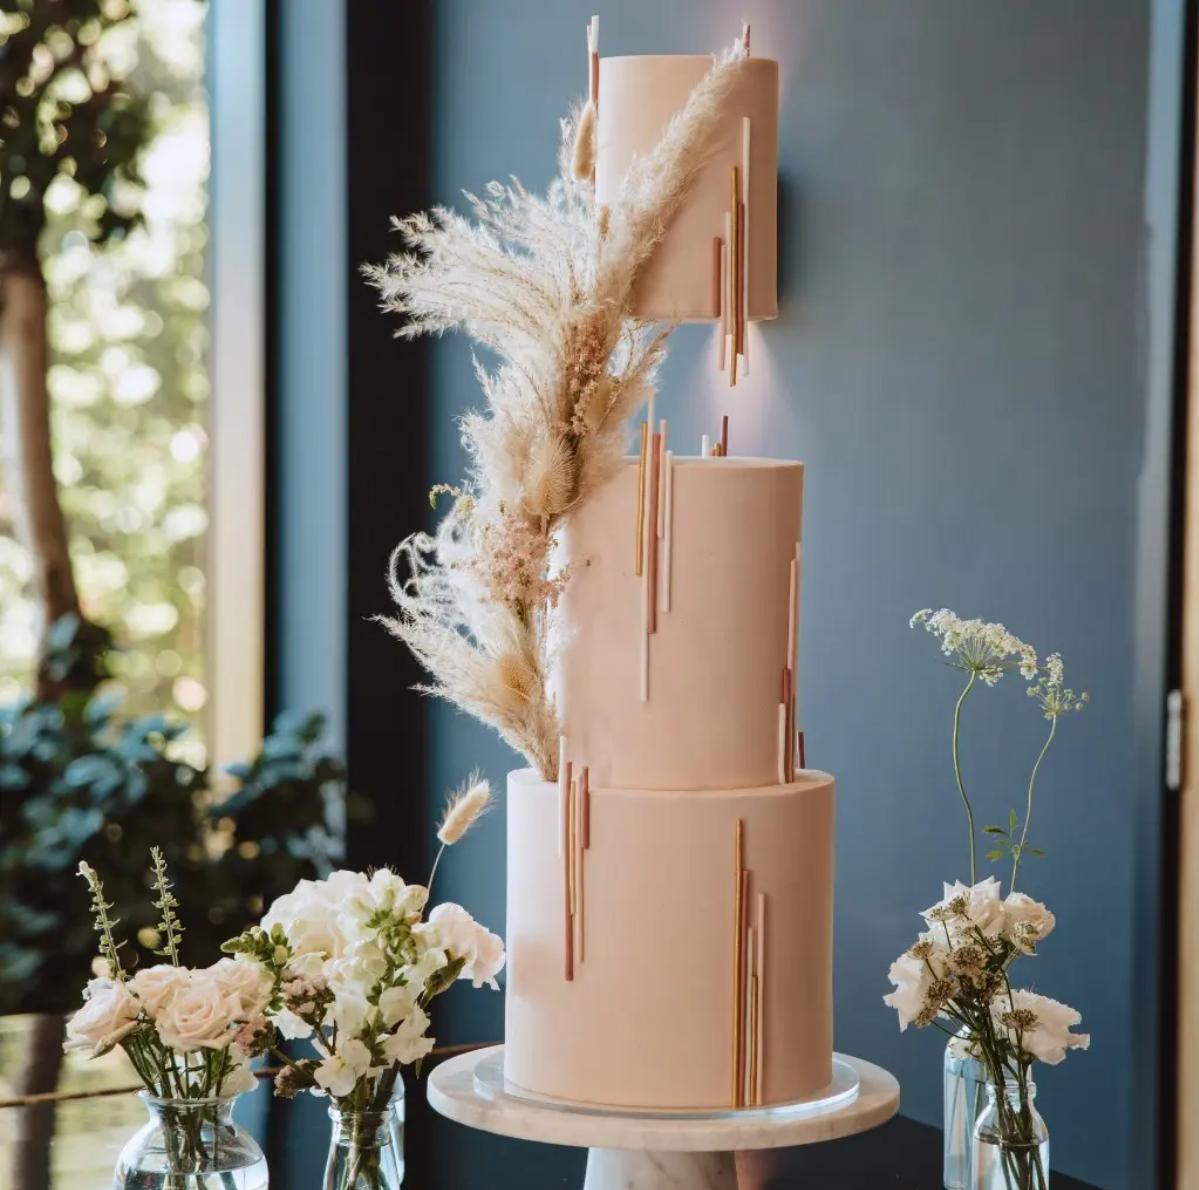 5 Modern Wedding Cakes Inspired by Artistic Backdrops | Park City Magazine